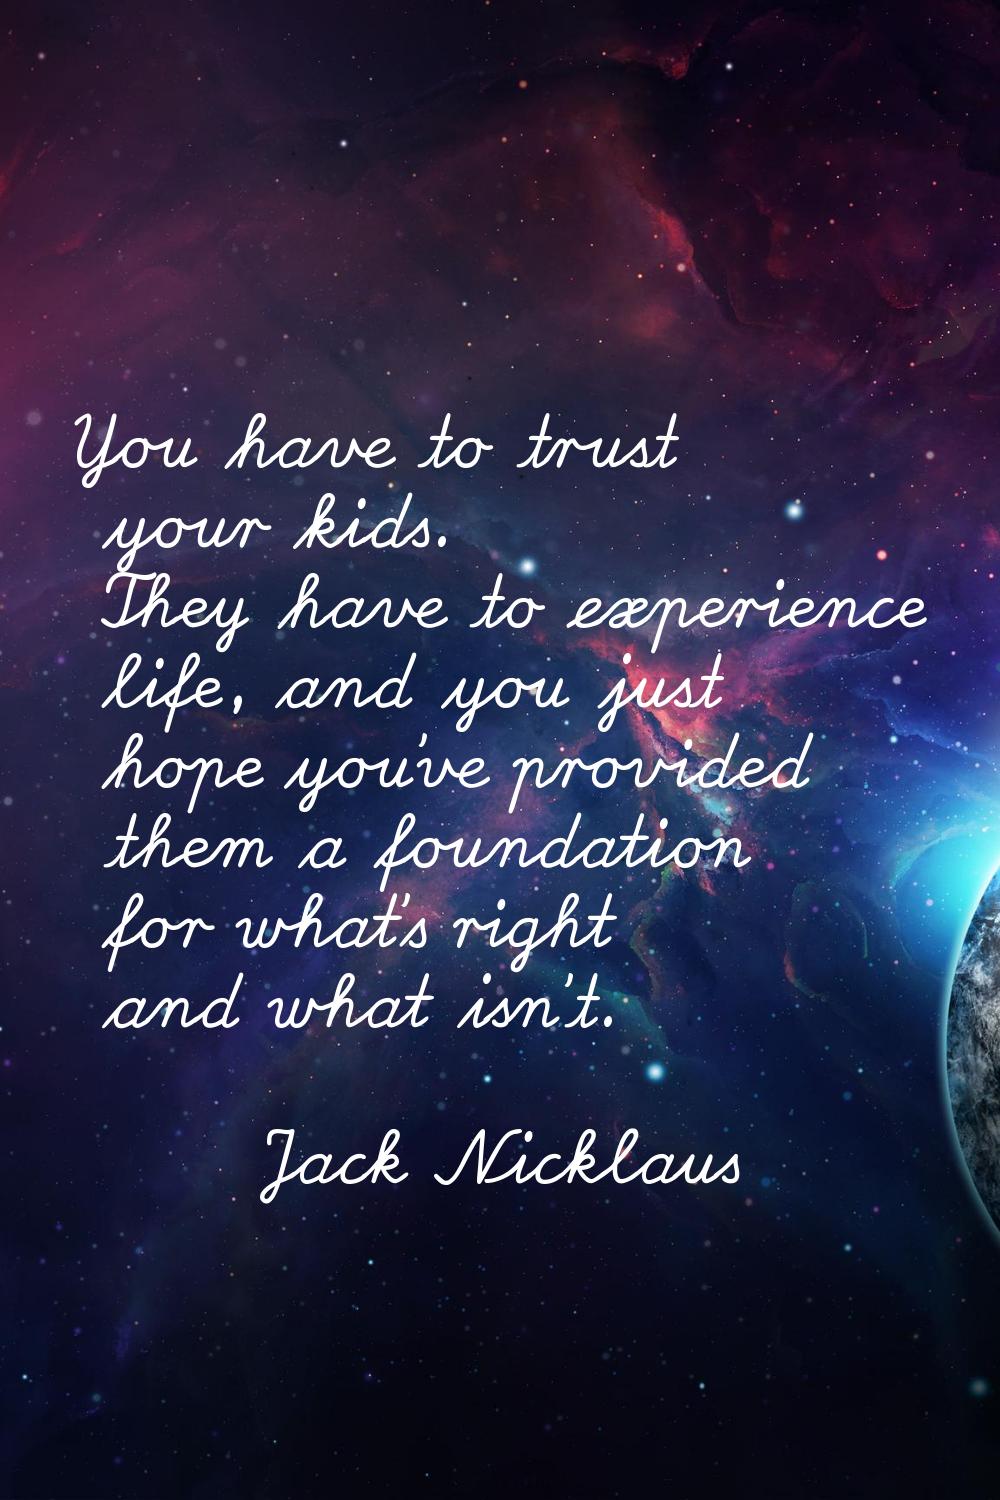 You have to trust your kids. They have to experience life, and you just hope you've provided them a